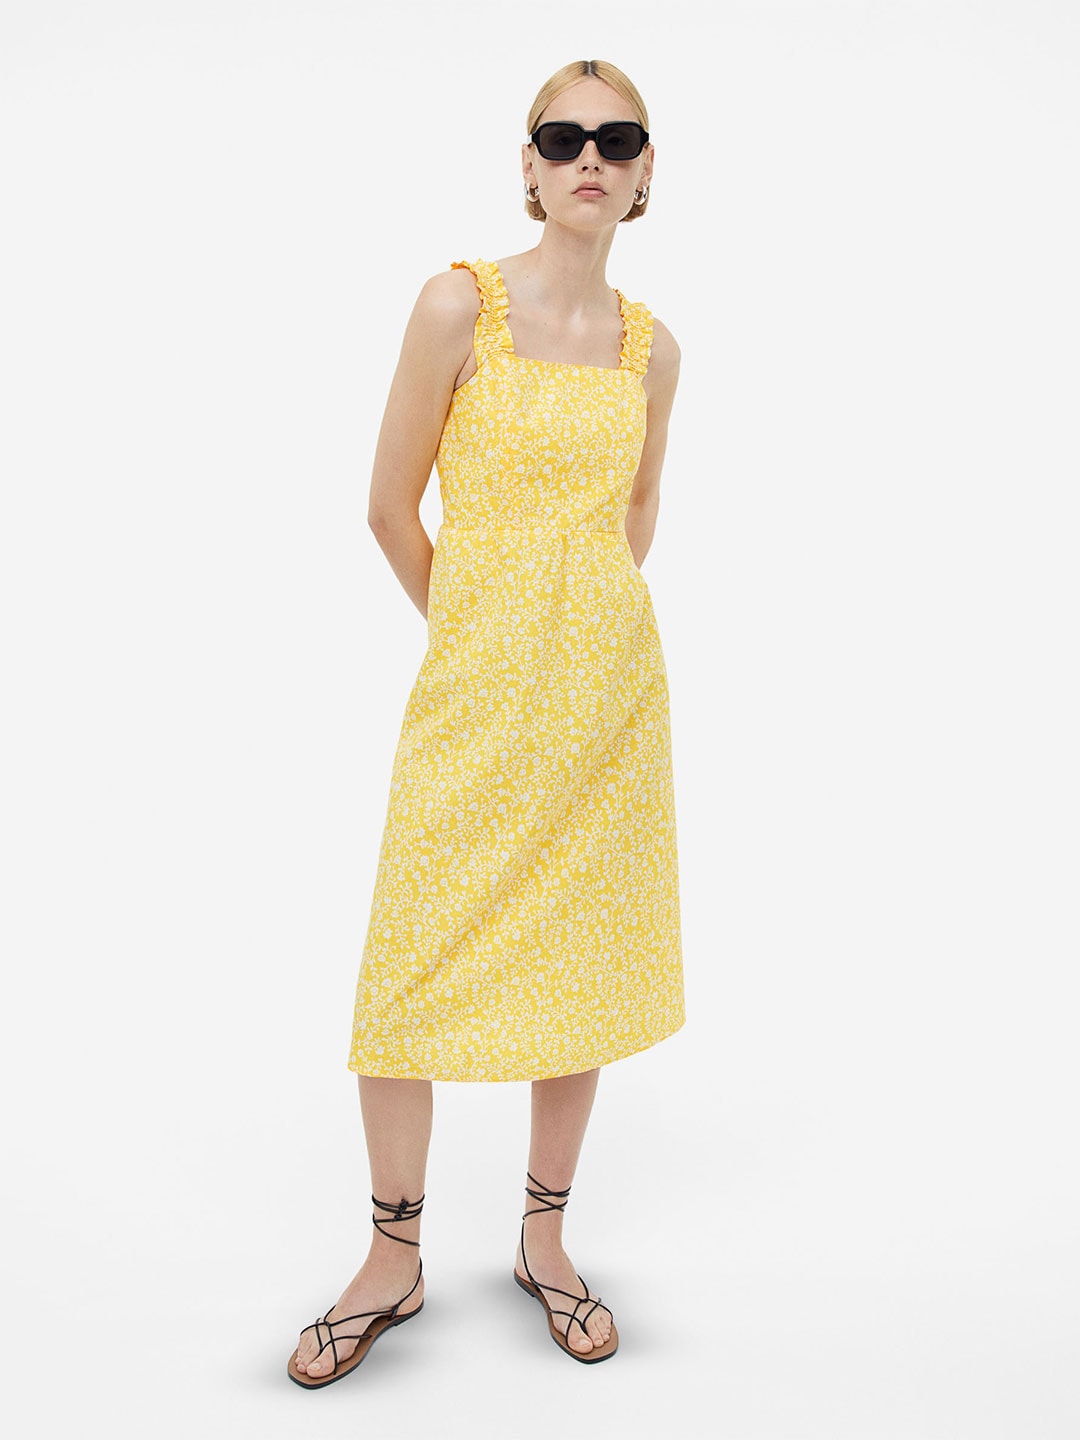 H&M Pure Cotton Patterned Dress Price in India